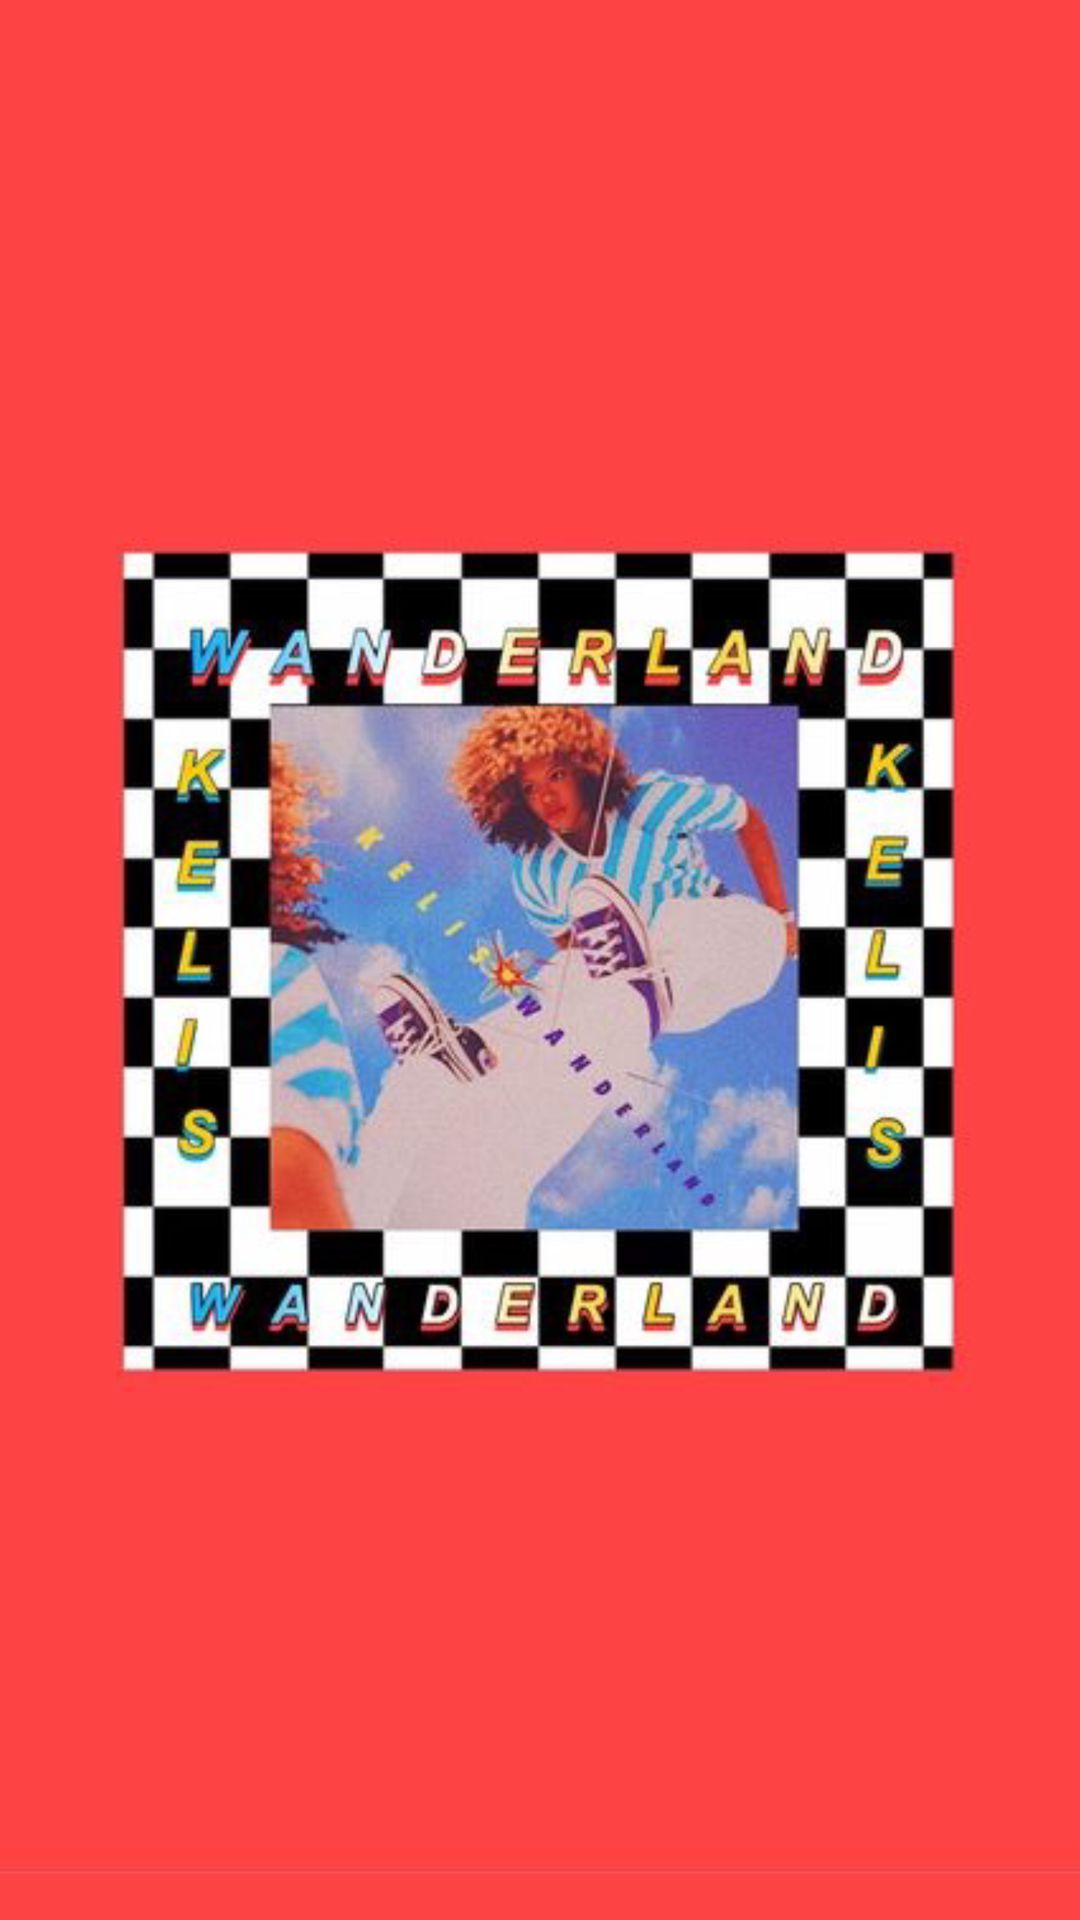 wanderland checkered colorful cute rad red black white